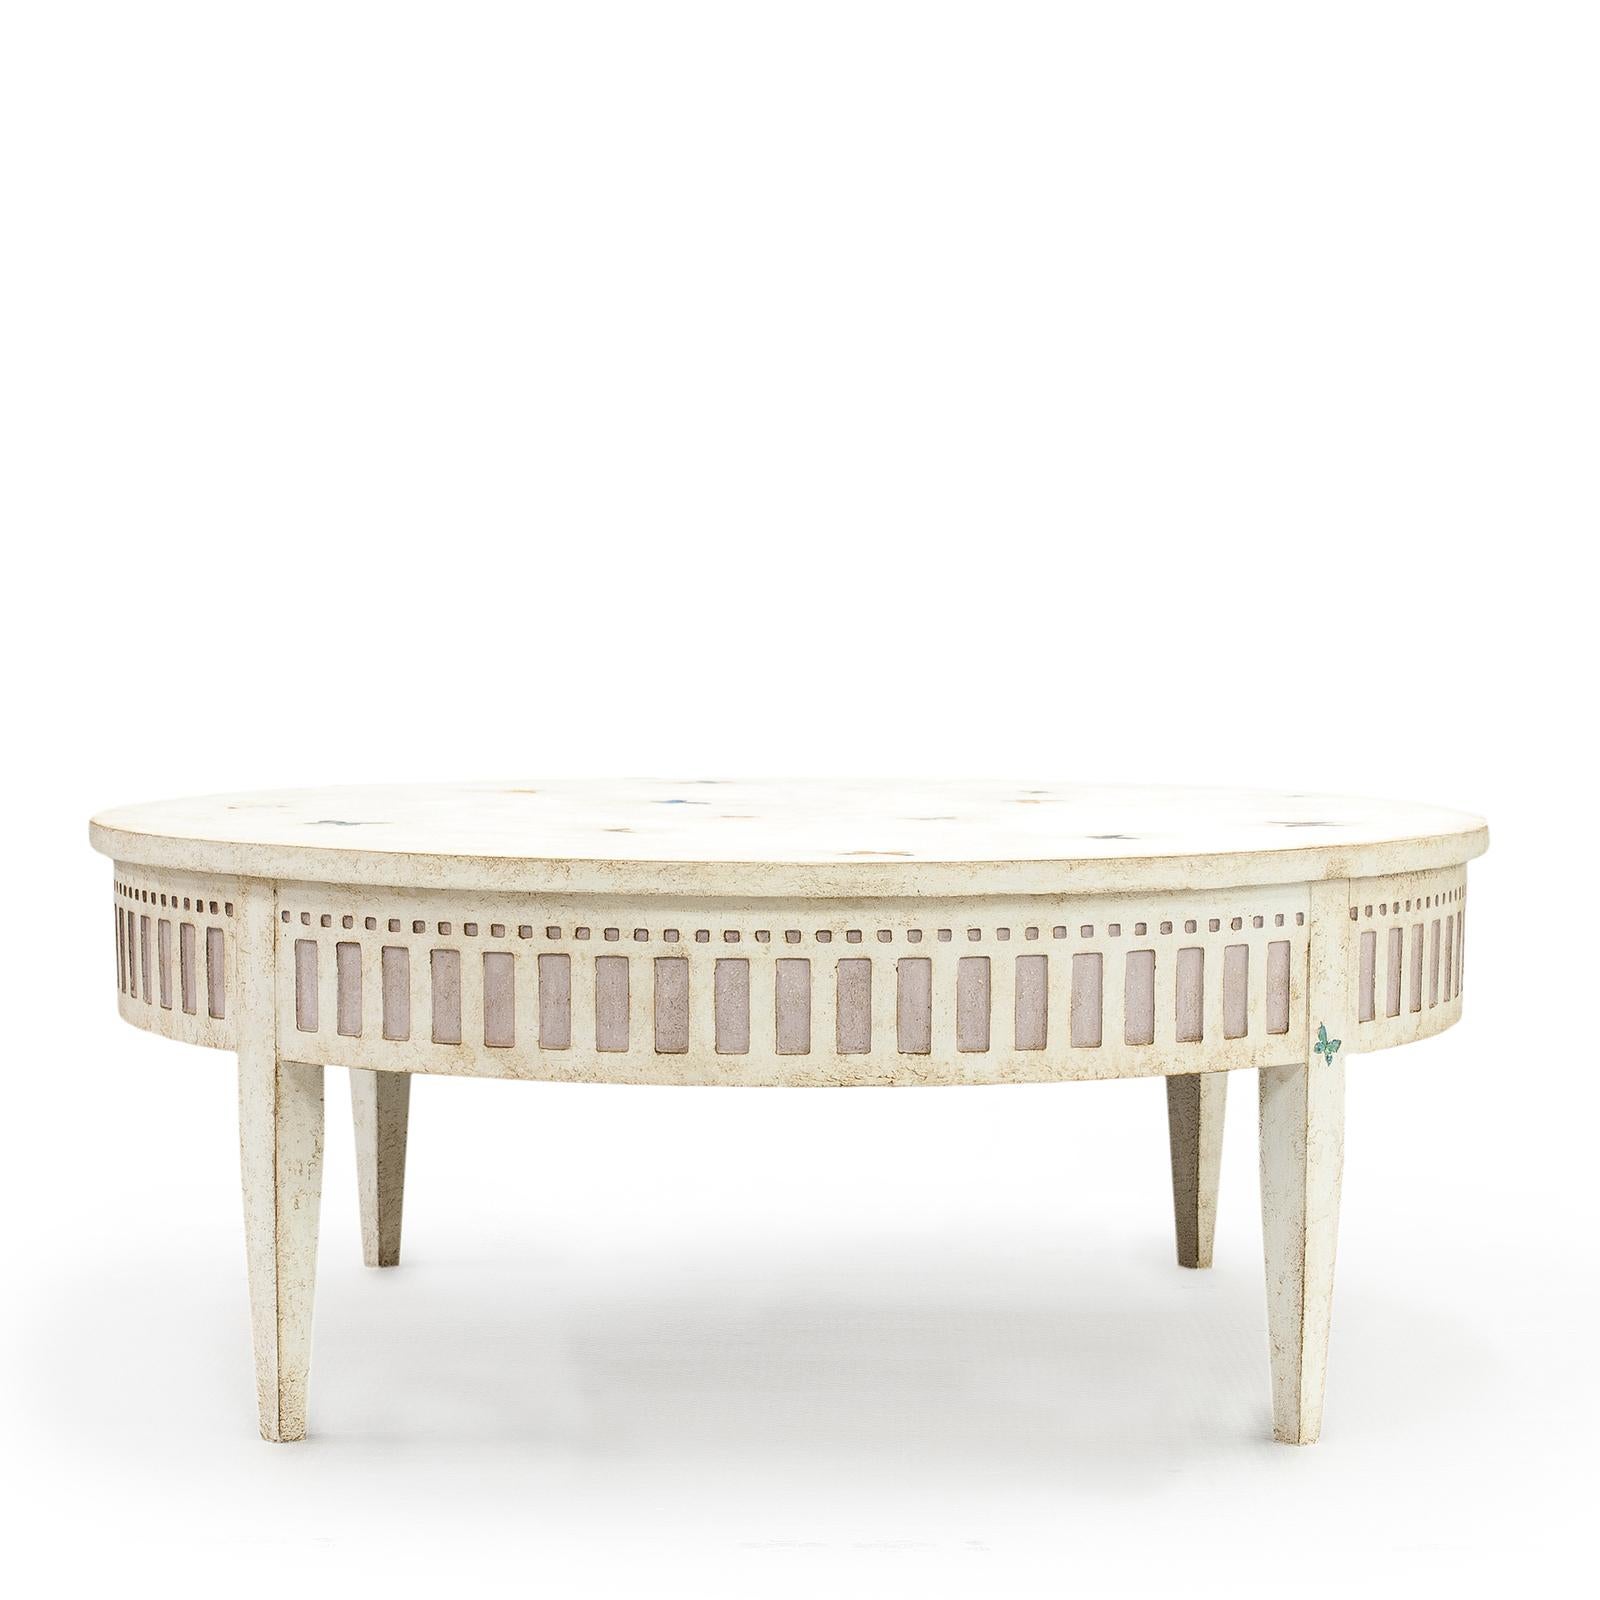 Inspired by the shape of the Verona Arena, a Roman amphitheater built in the first century renowned today for its large-scale opera performances, this stunning coffee table is hand painted in creamy white with an antique finish and colorful